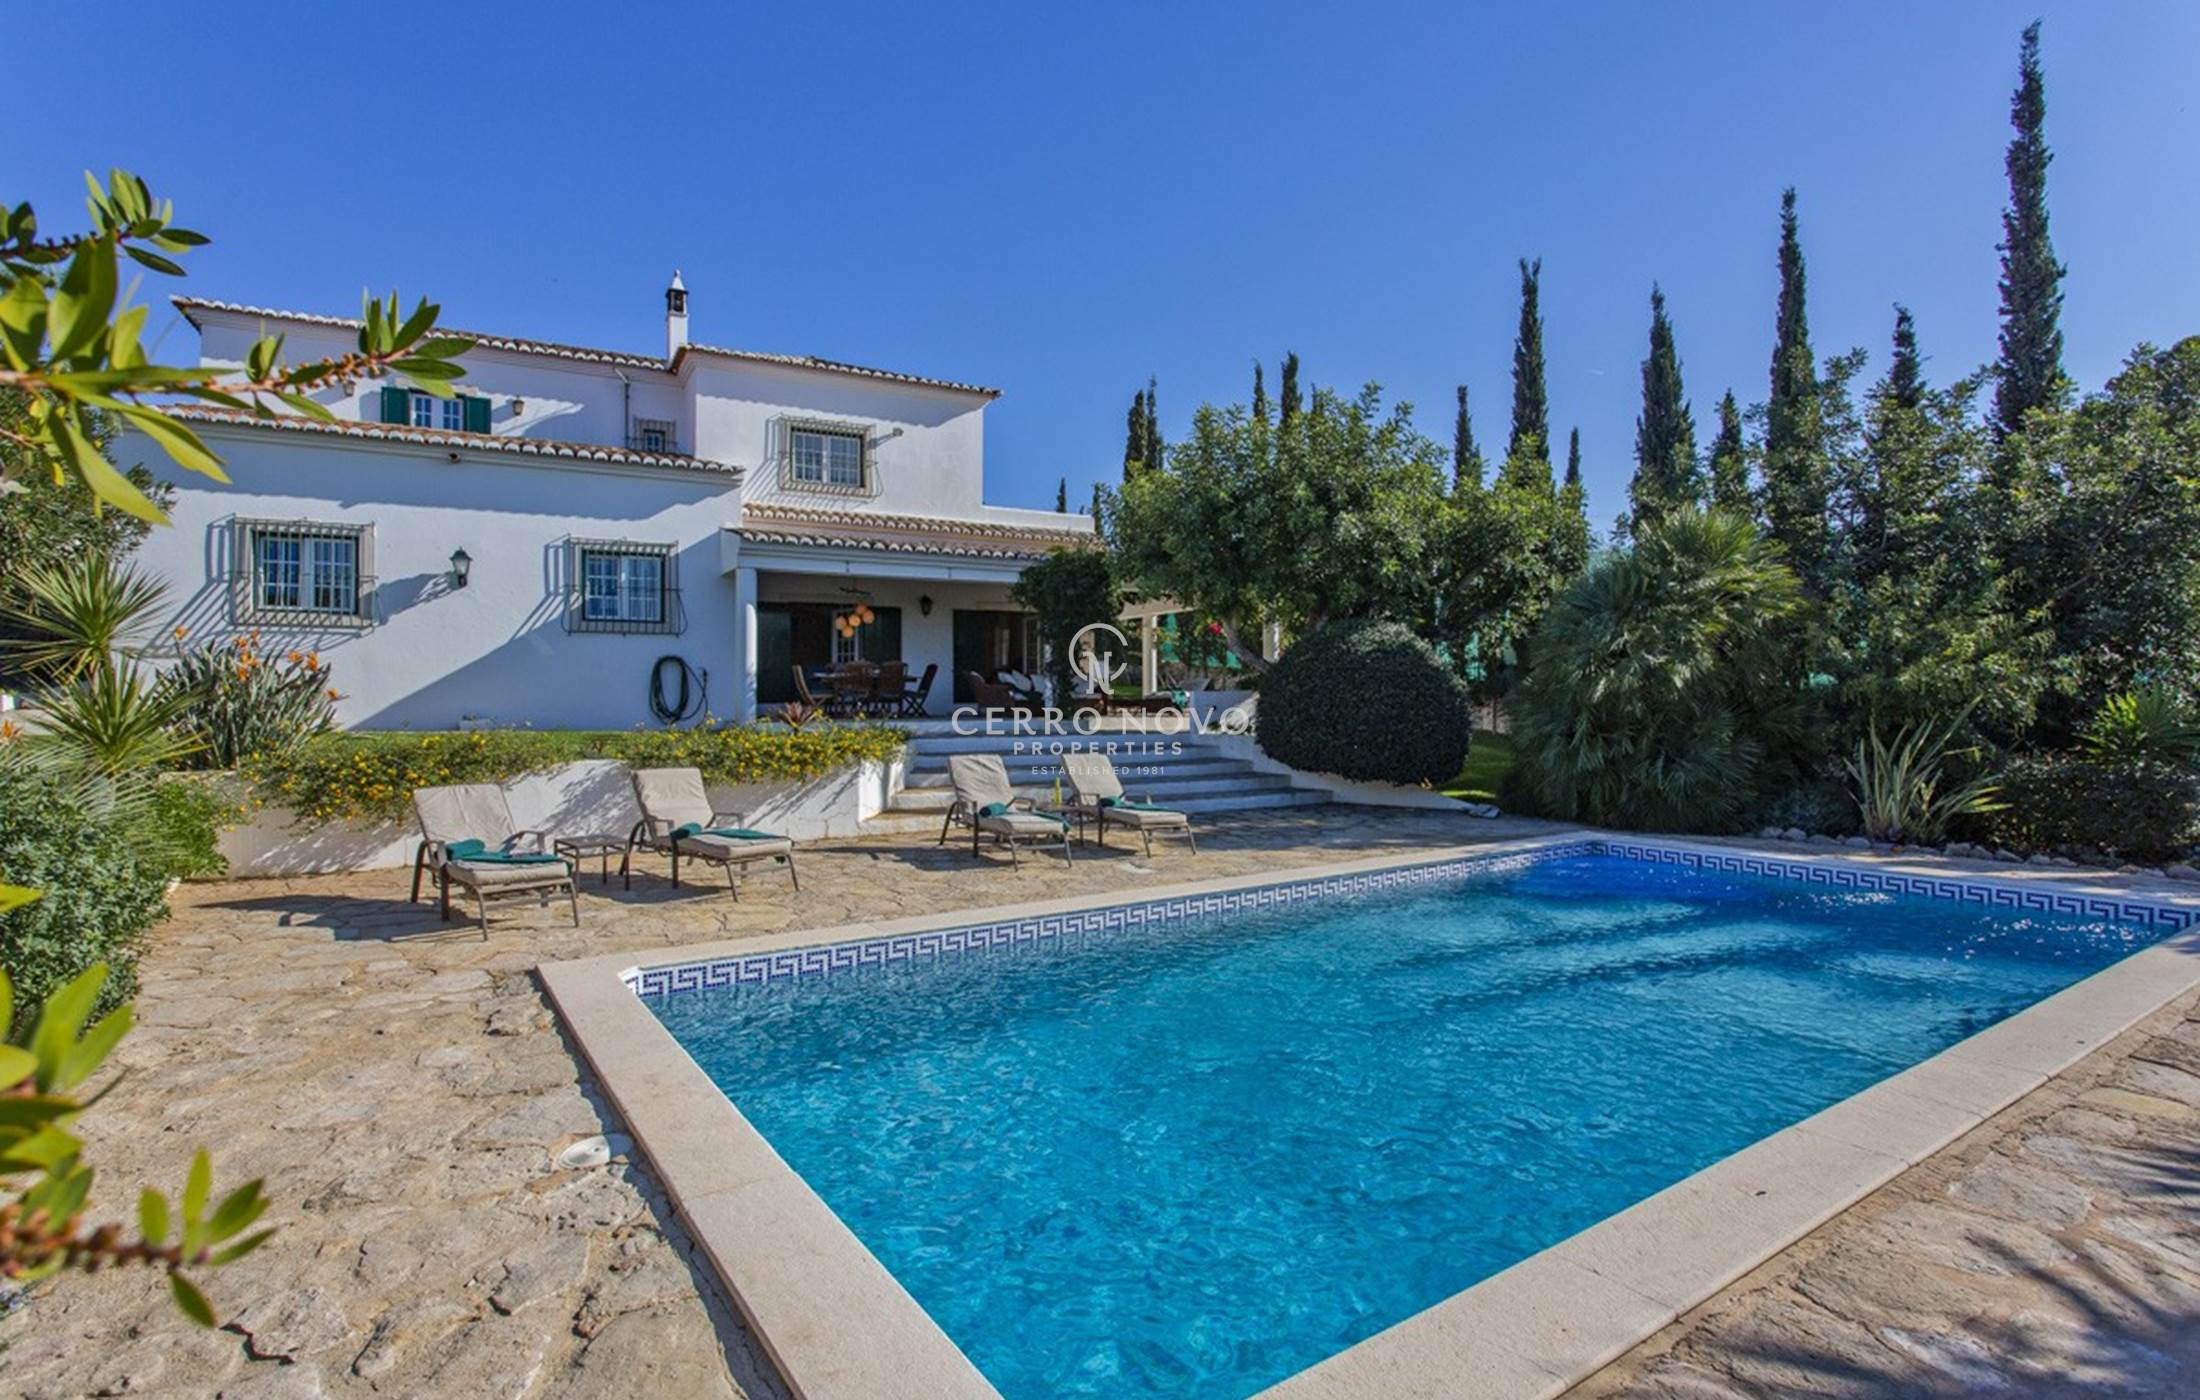 Character Six (5+1) bedroom Manor House style villa with landscaped gardens & pool